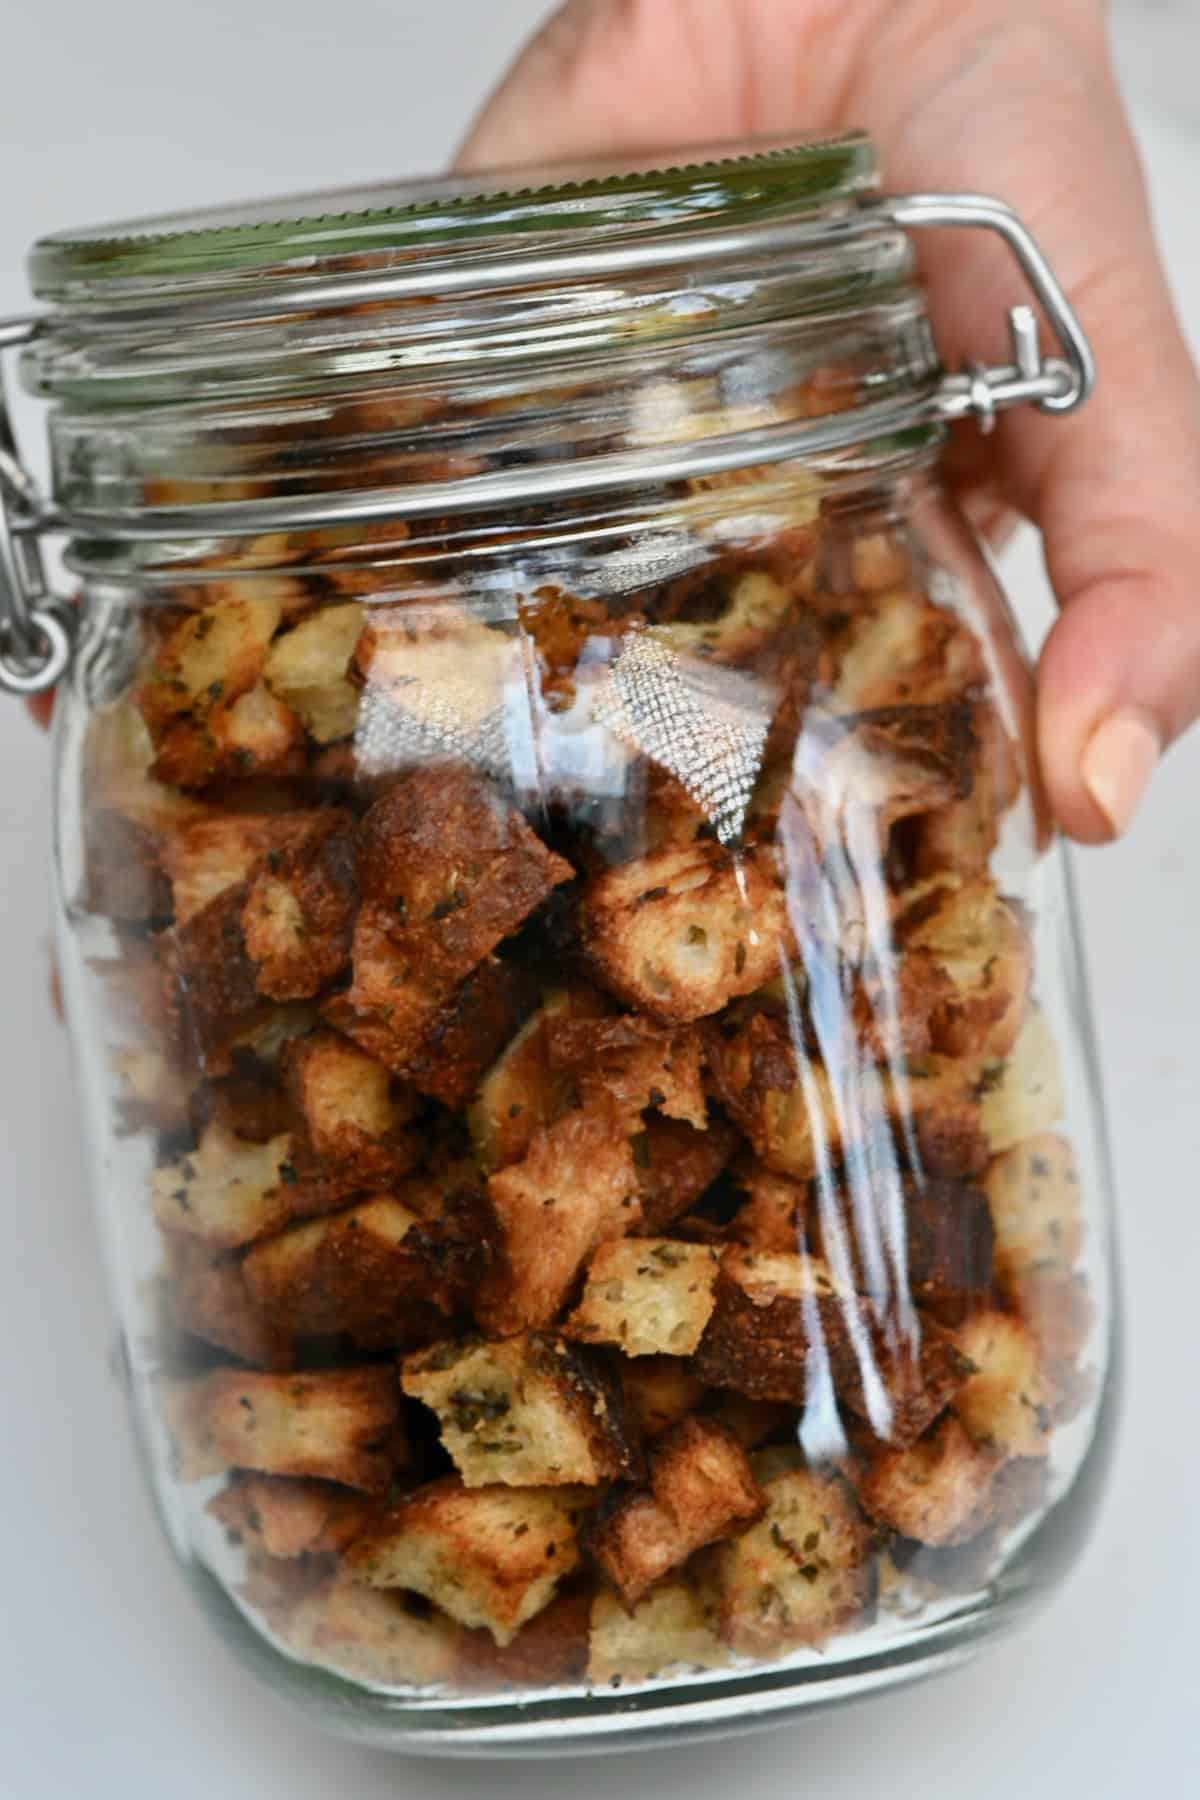 Croutons in a jar